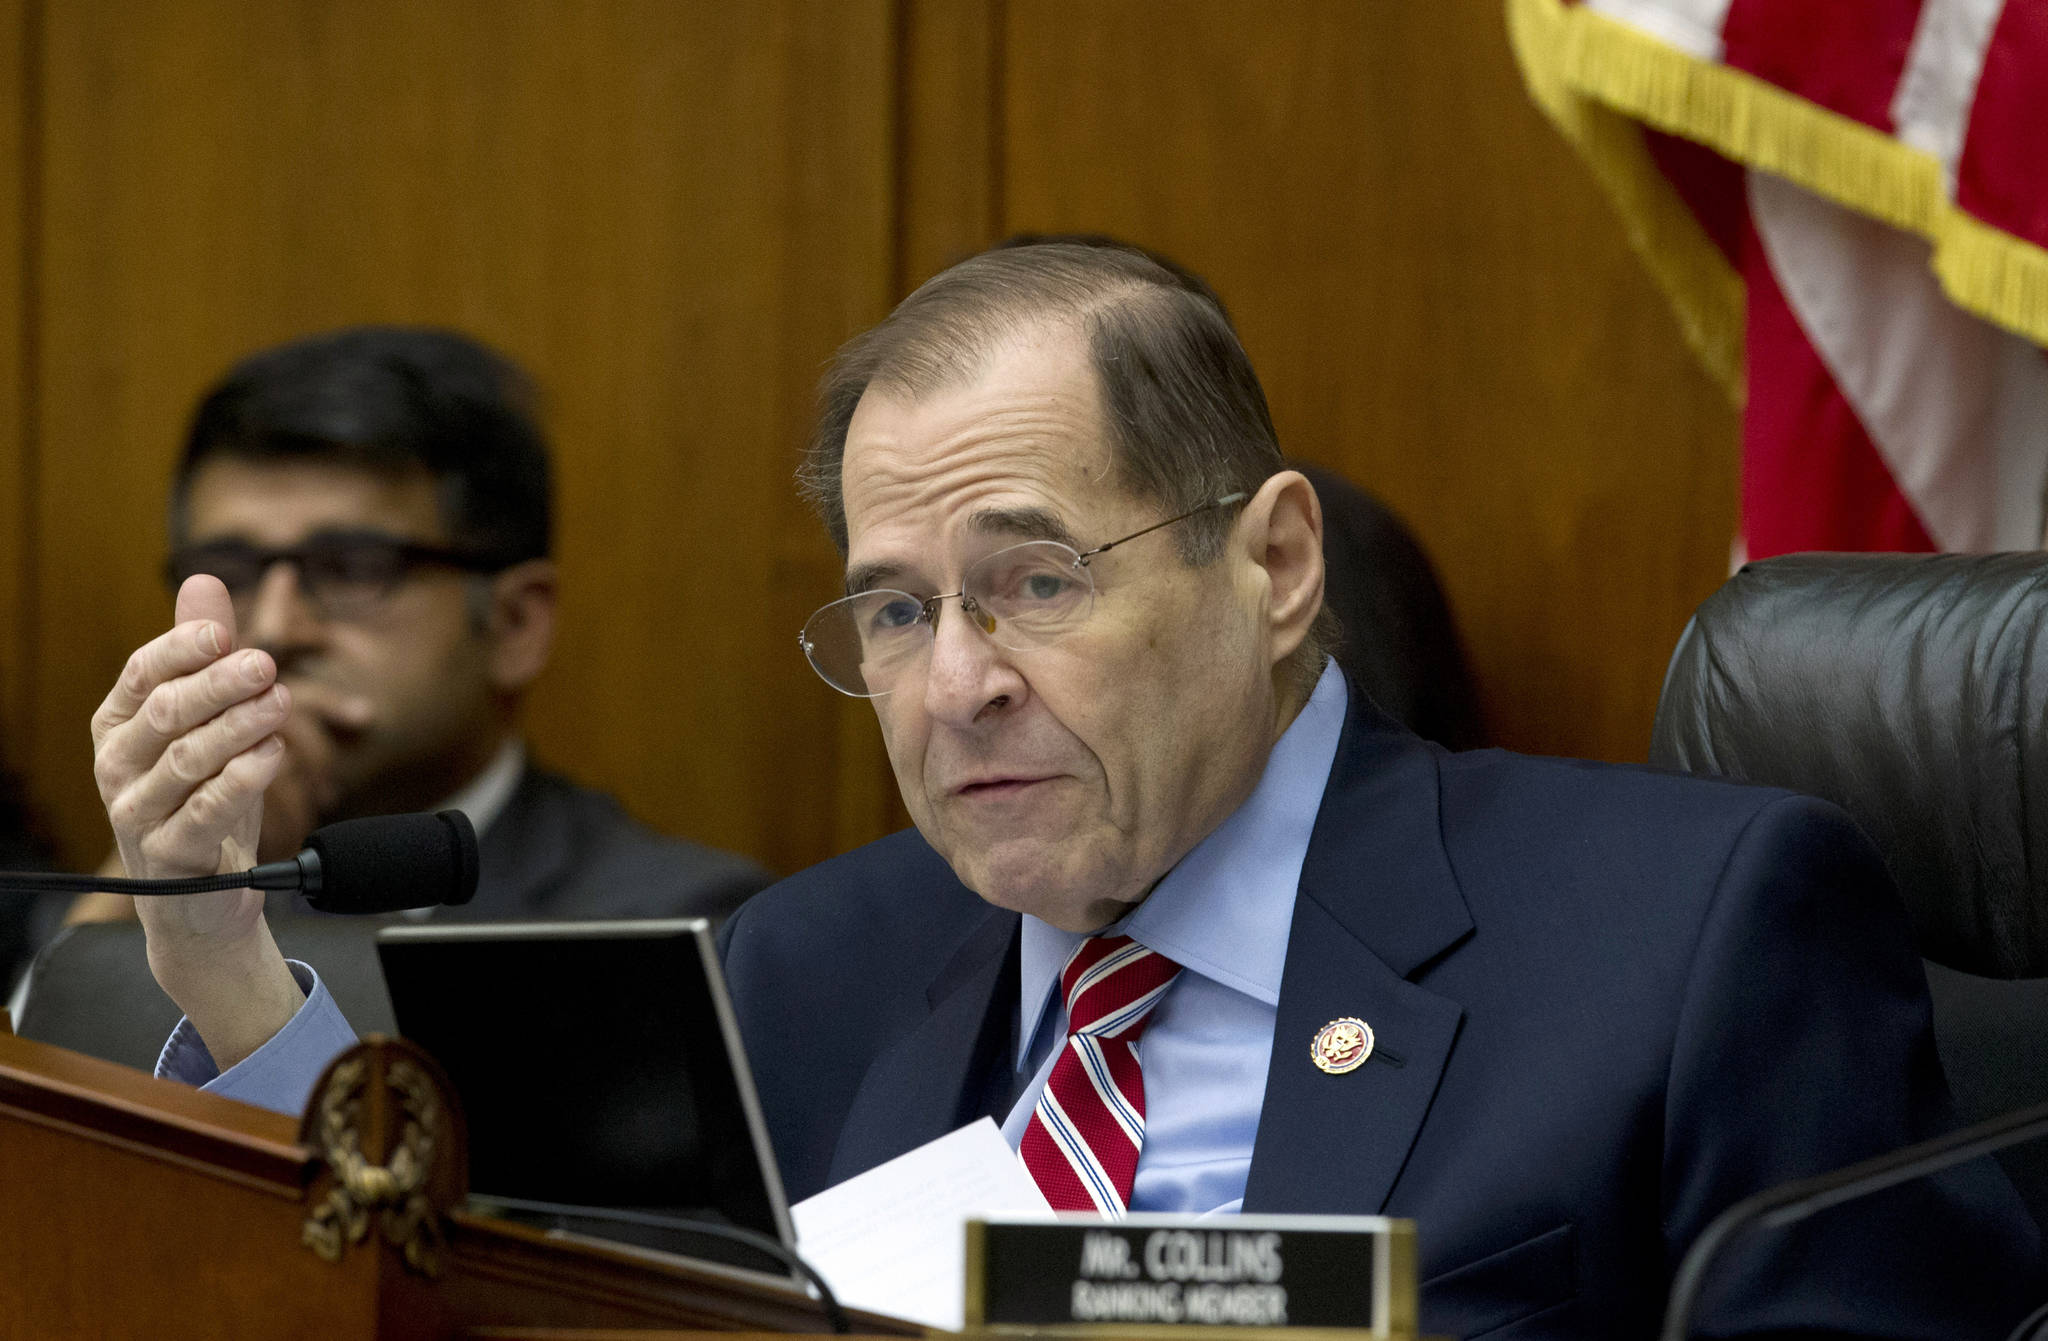 House Judiciary Committee Chairman Rep. Jerrold Nadler speaks during a House Judiciary Committee debate to subpoena Acting Attorney General Matthew Whitaker, on Capitol Hill on Thursday. (AP Photo/Jose Luis Magana)